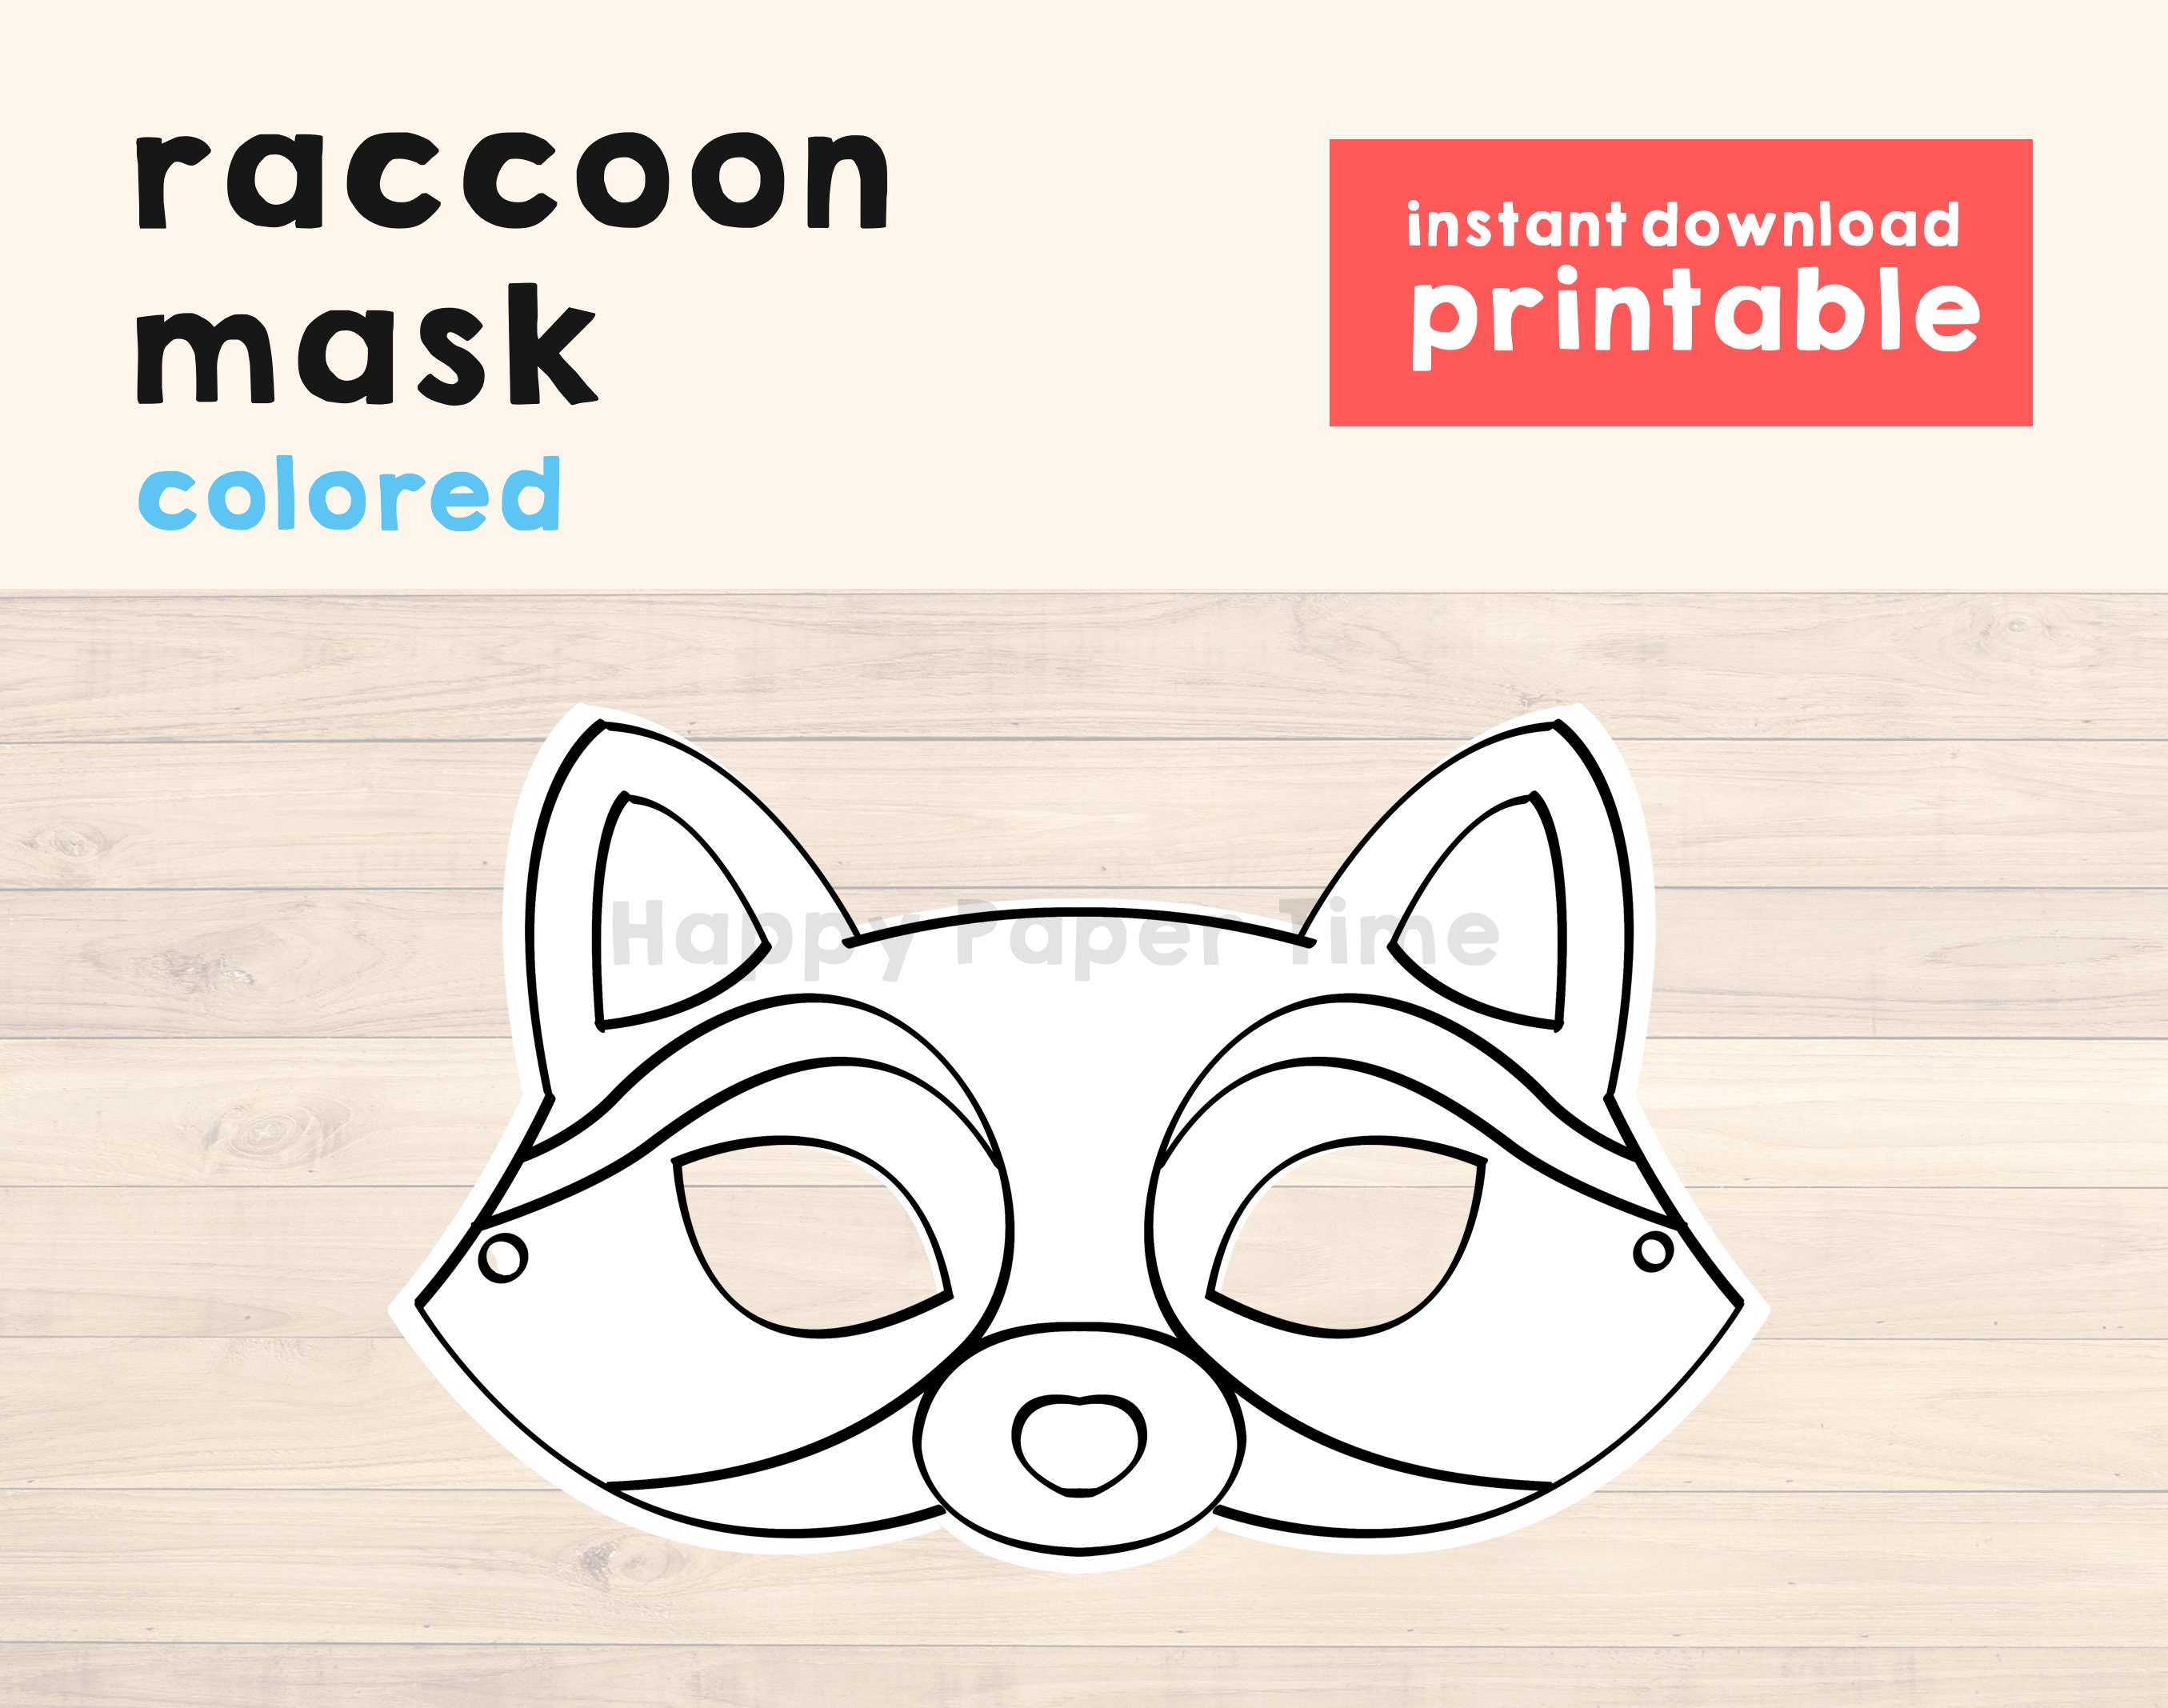 Raccoon Mask Animal Mask Printable Party Favor Woodland Party Etsy Espa a